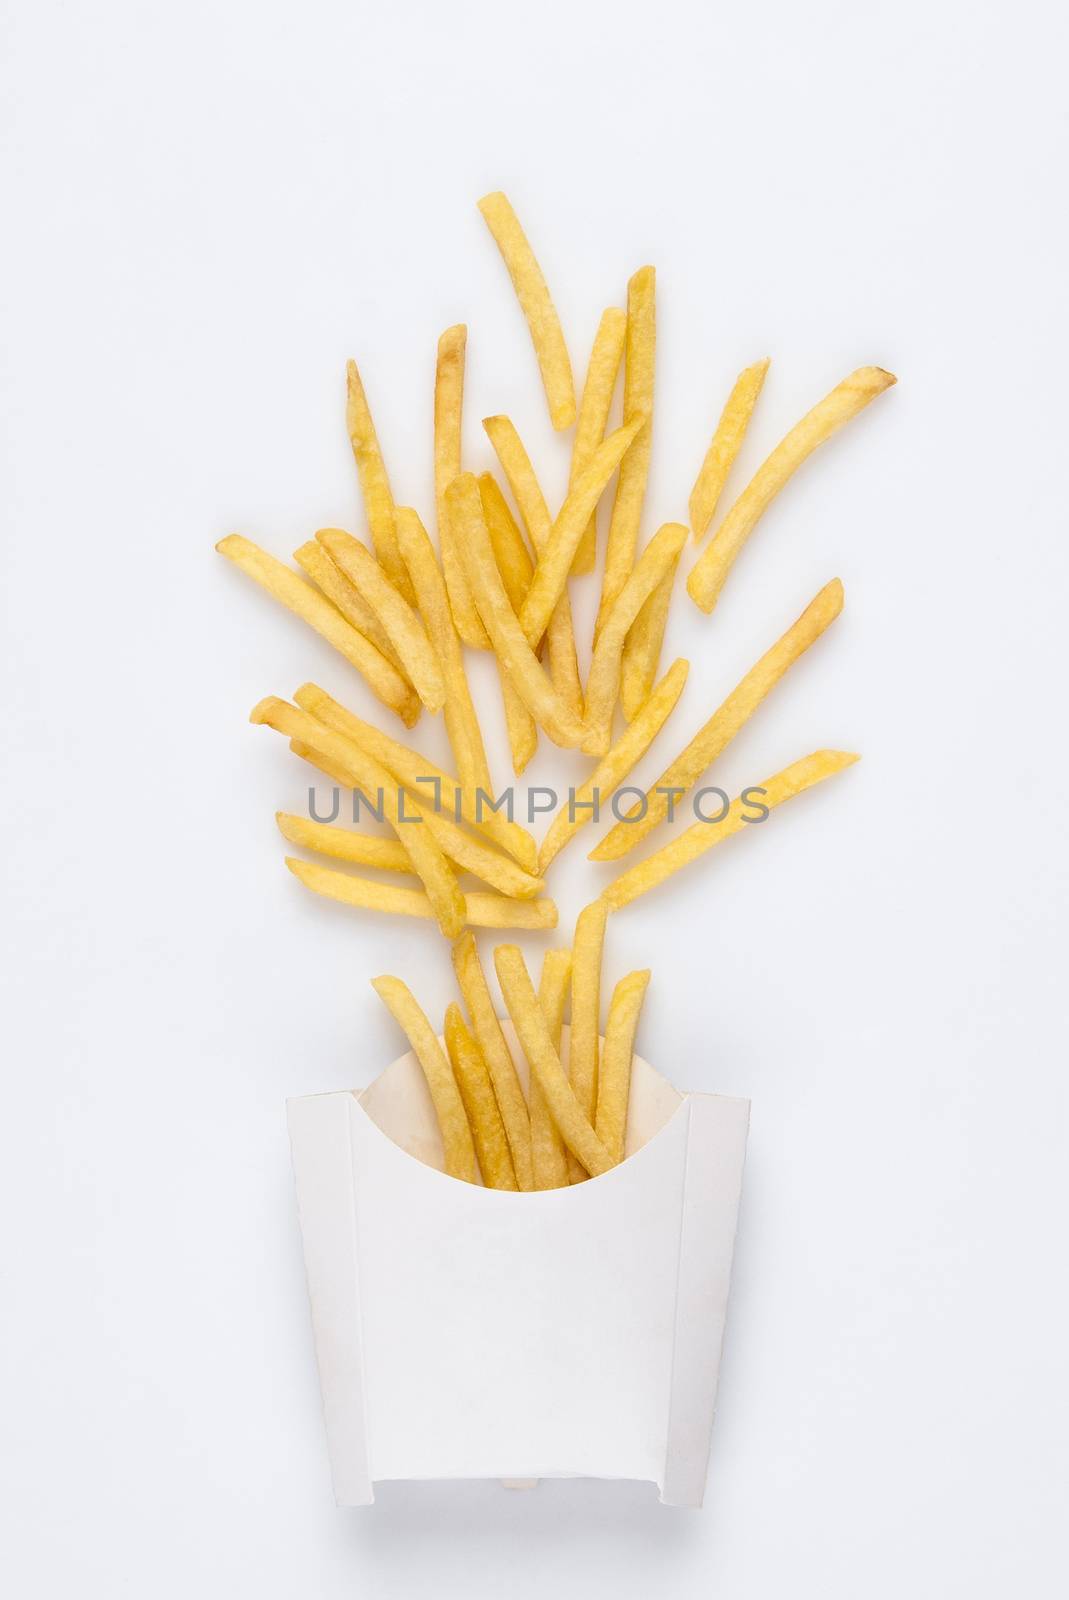 on a white background fried french fries in a white box. studio photo of fried french fries on white background